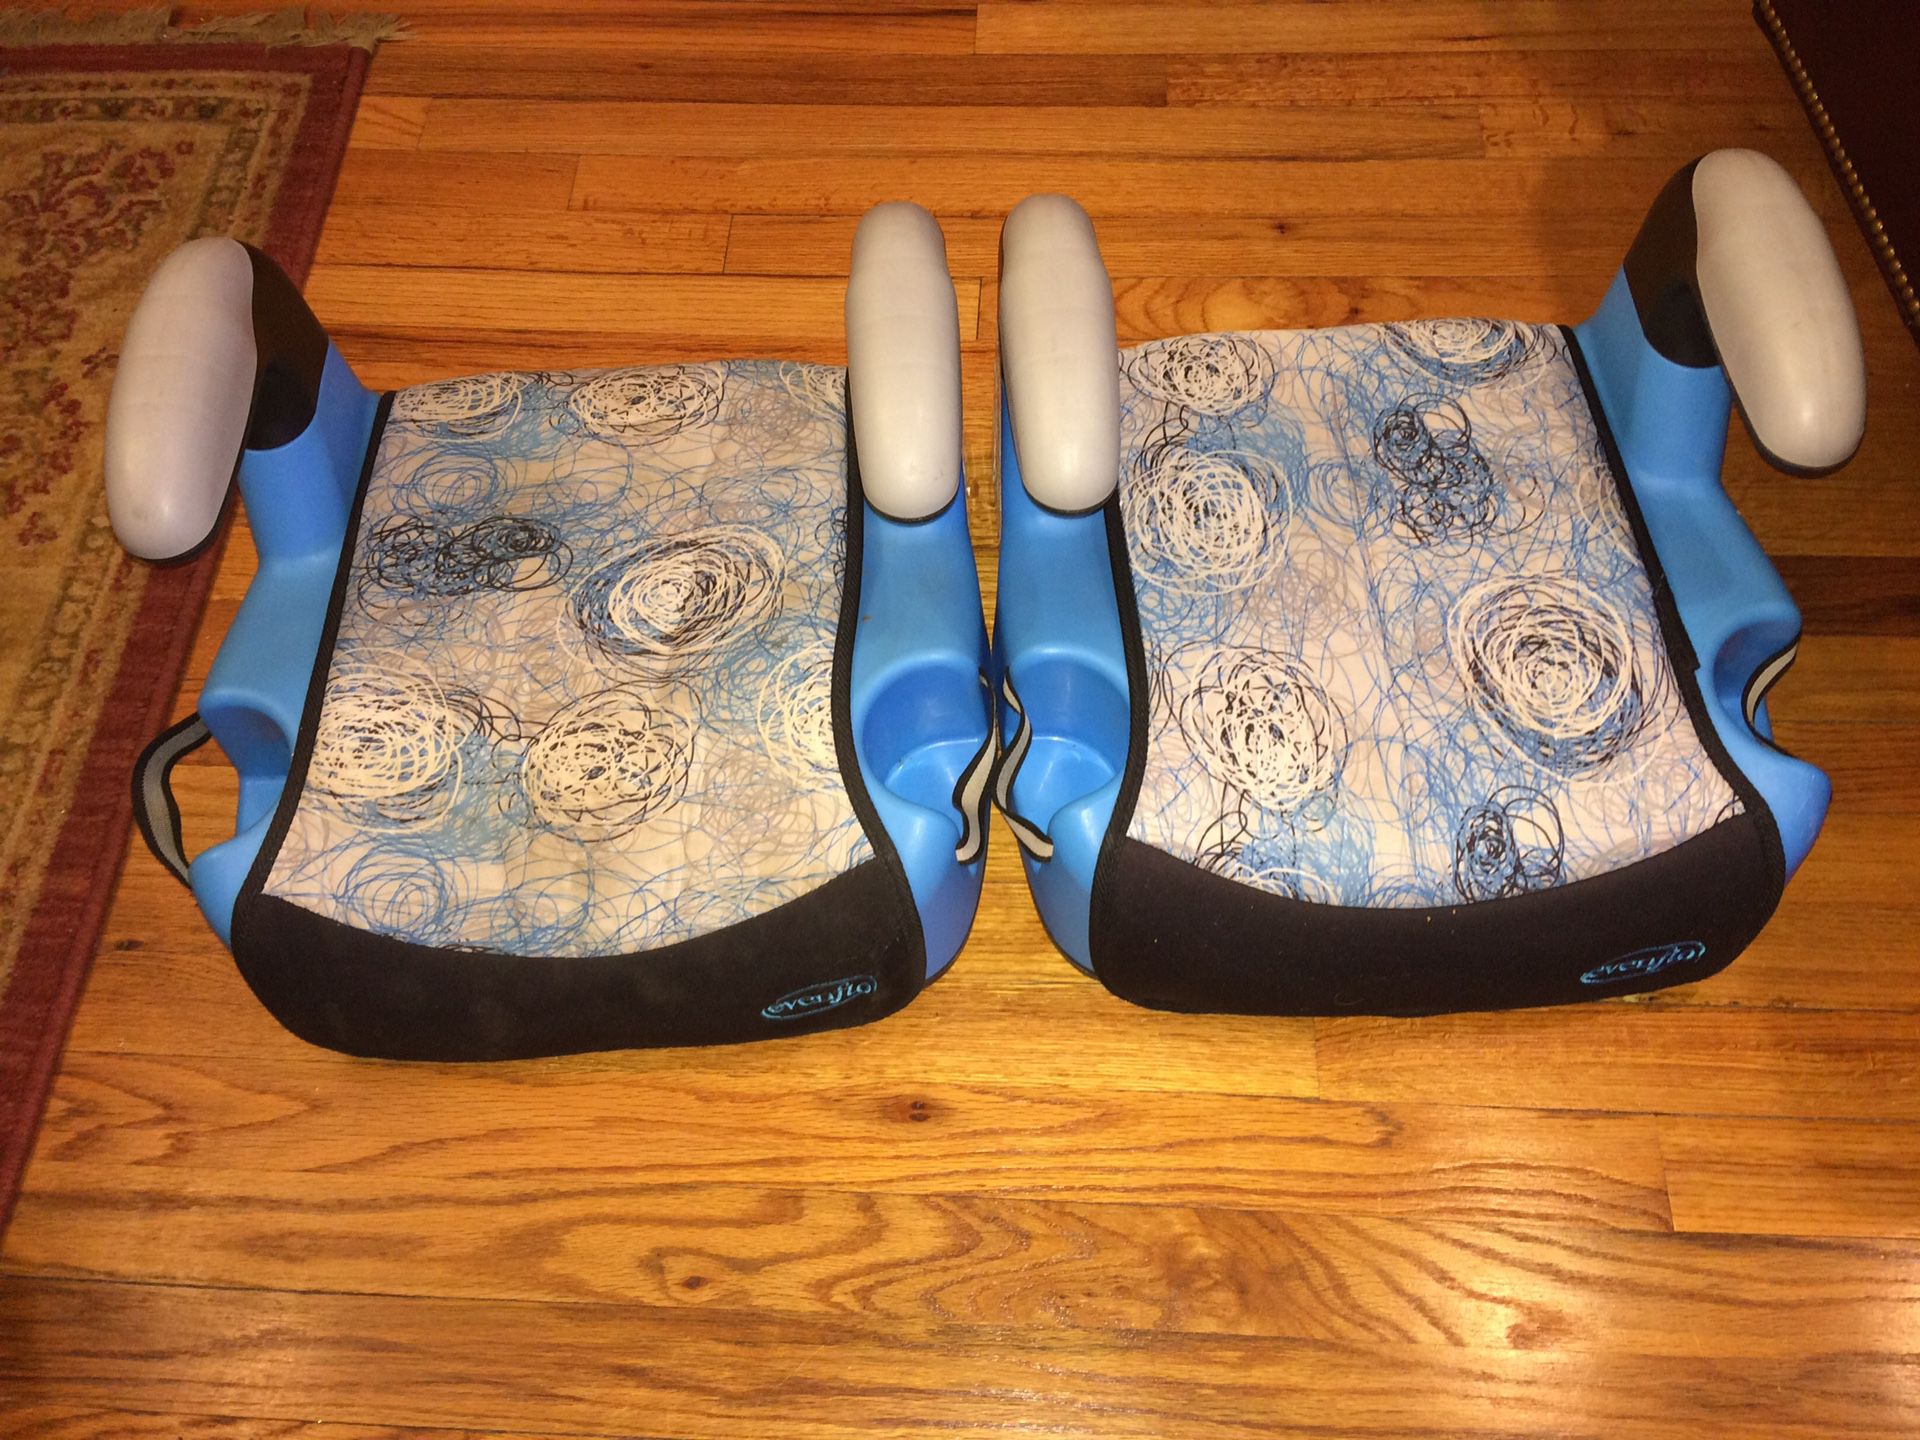 Two Evenflo Booster Car Seats